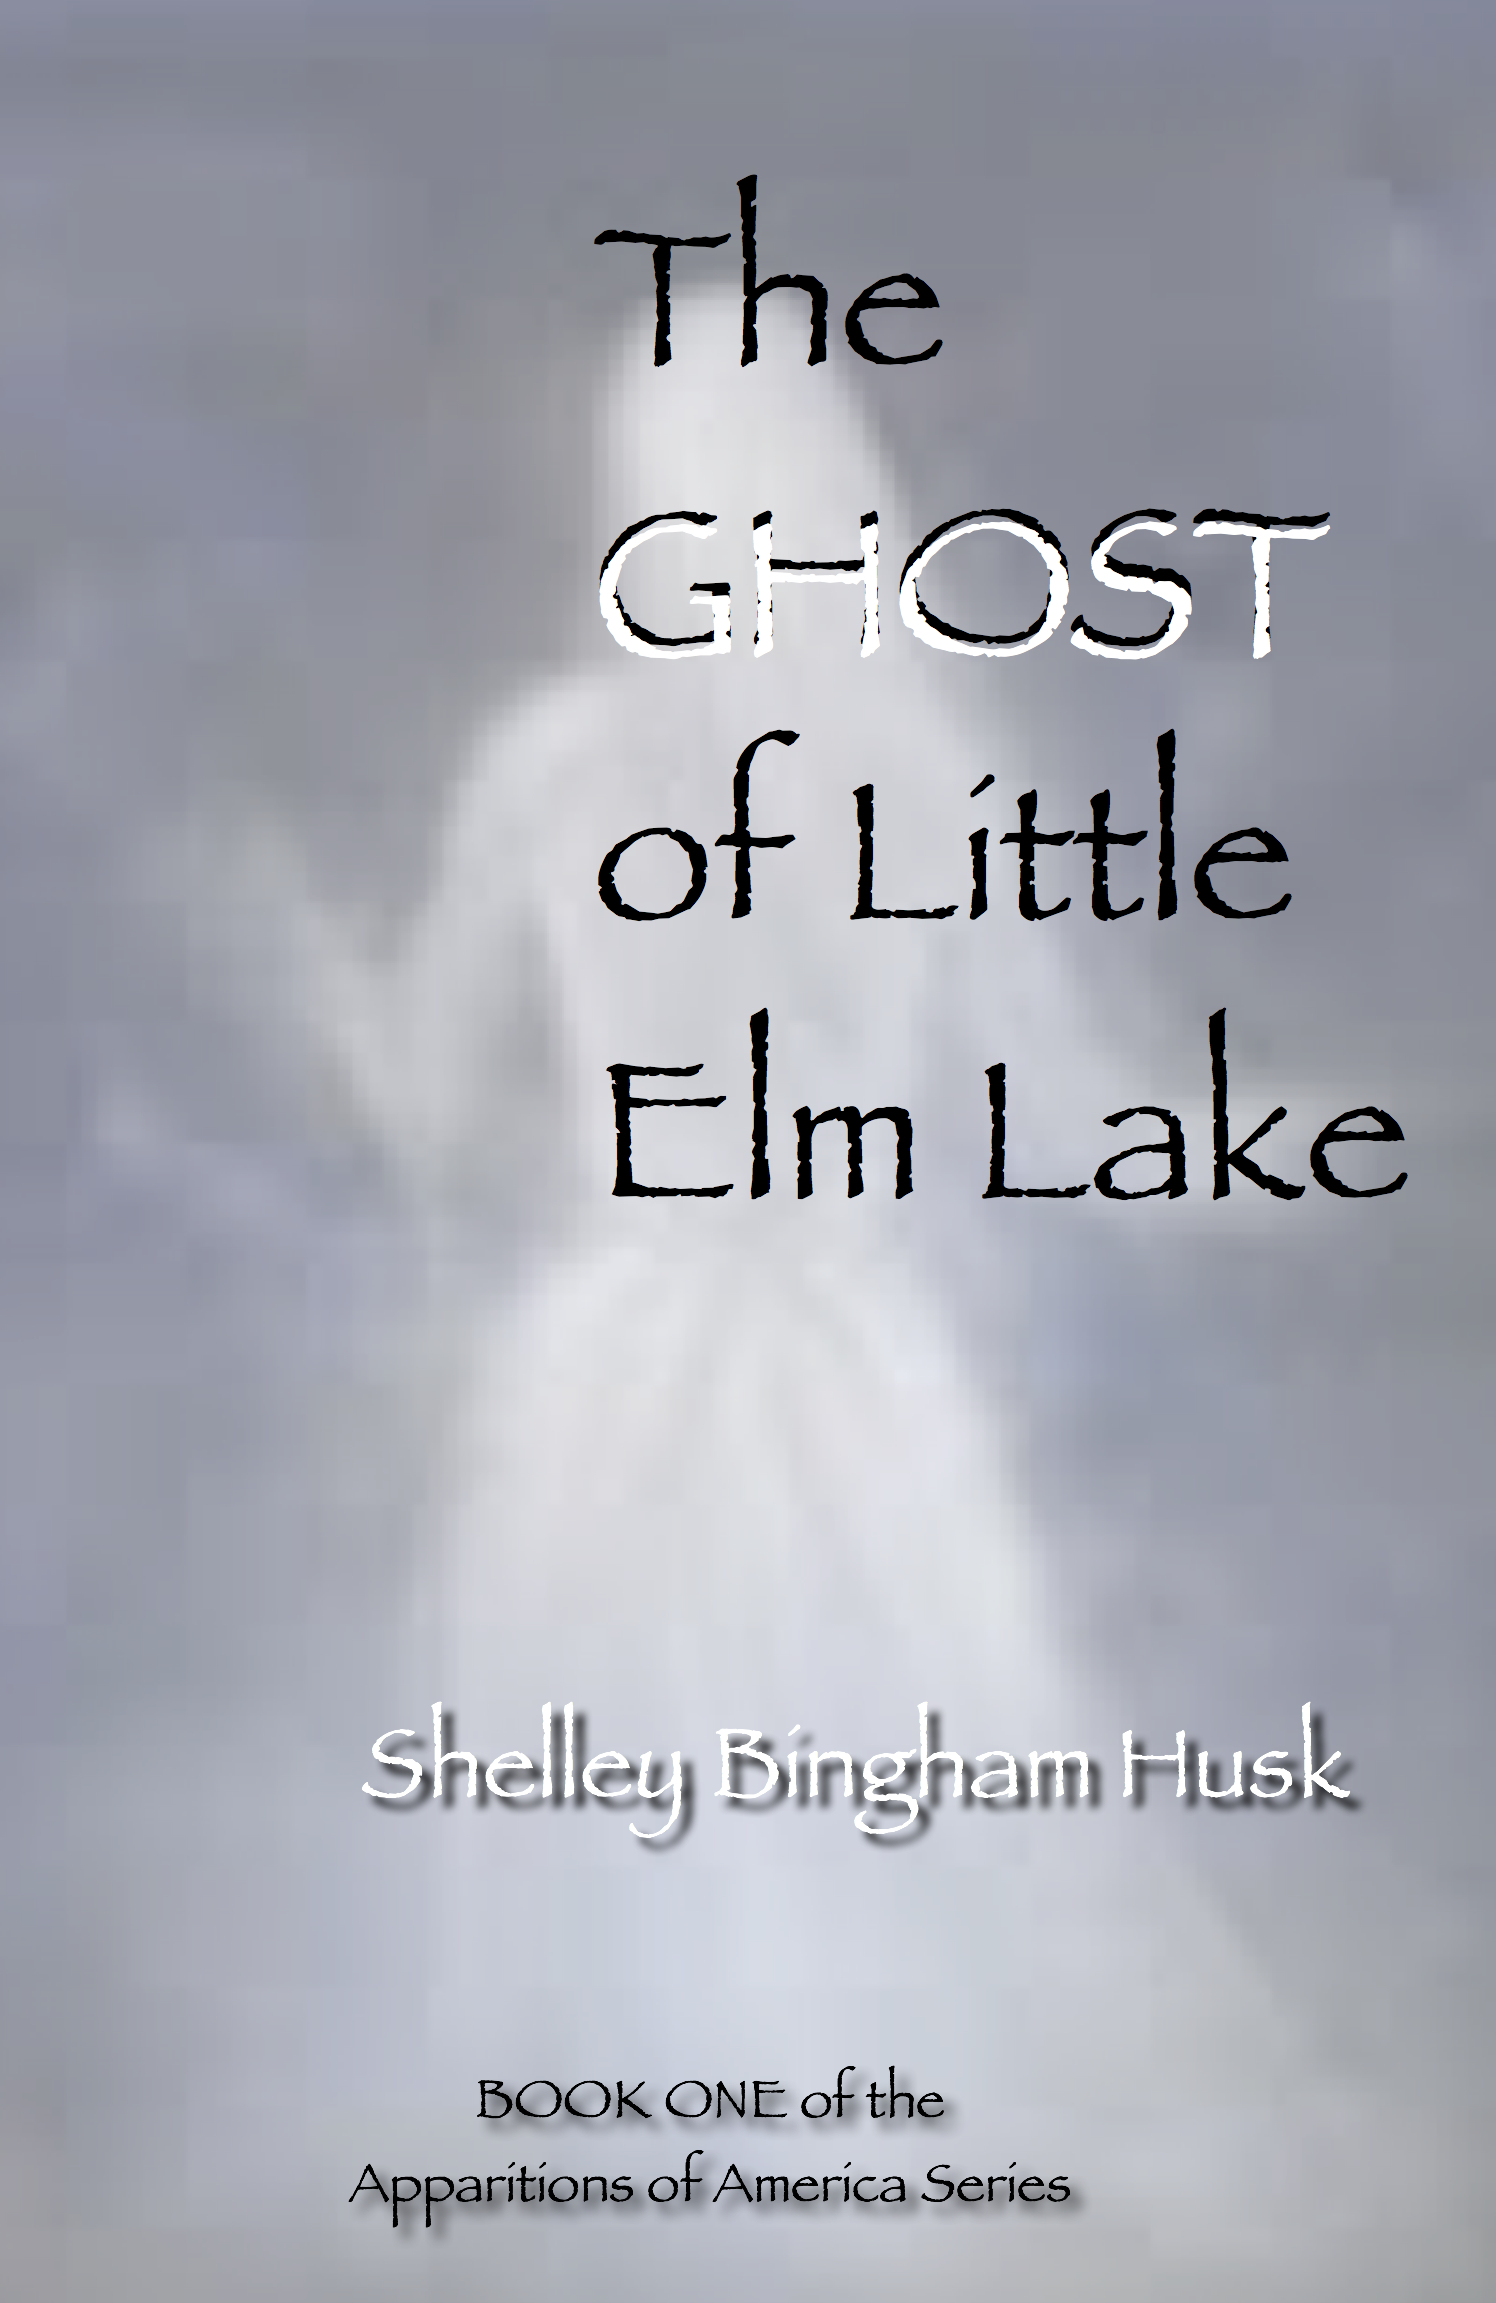 The Ghost of Little Elm Lake — True Ghost Story